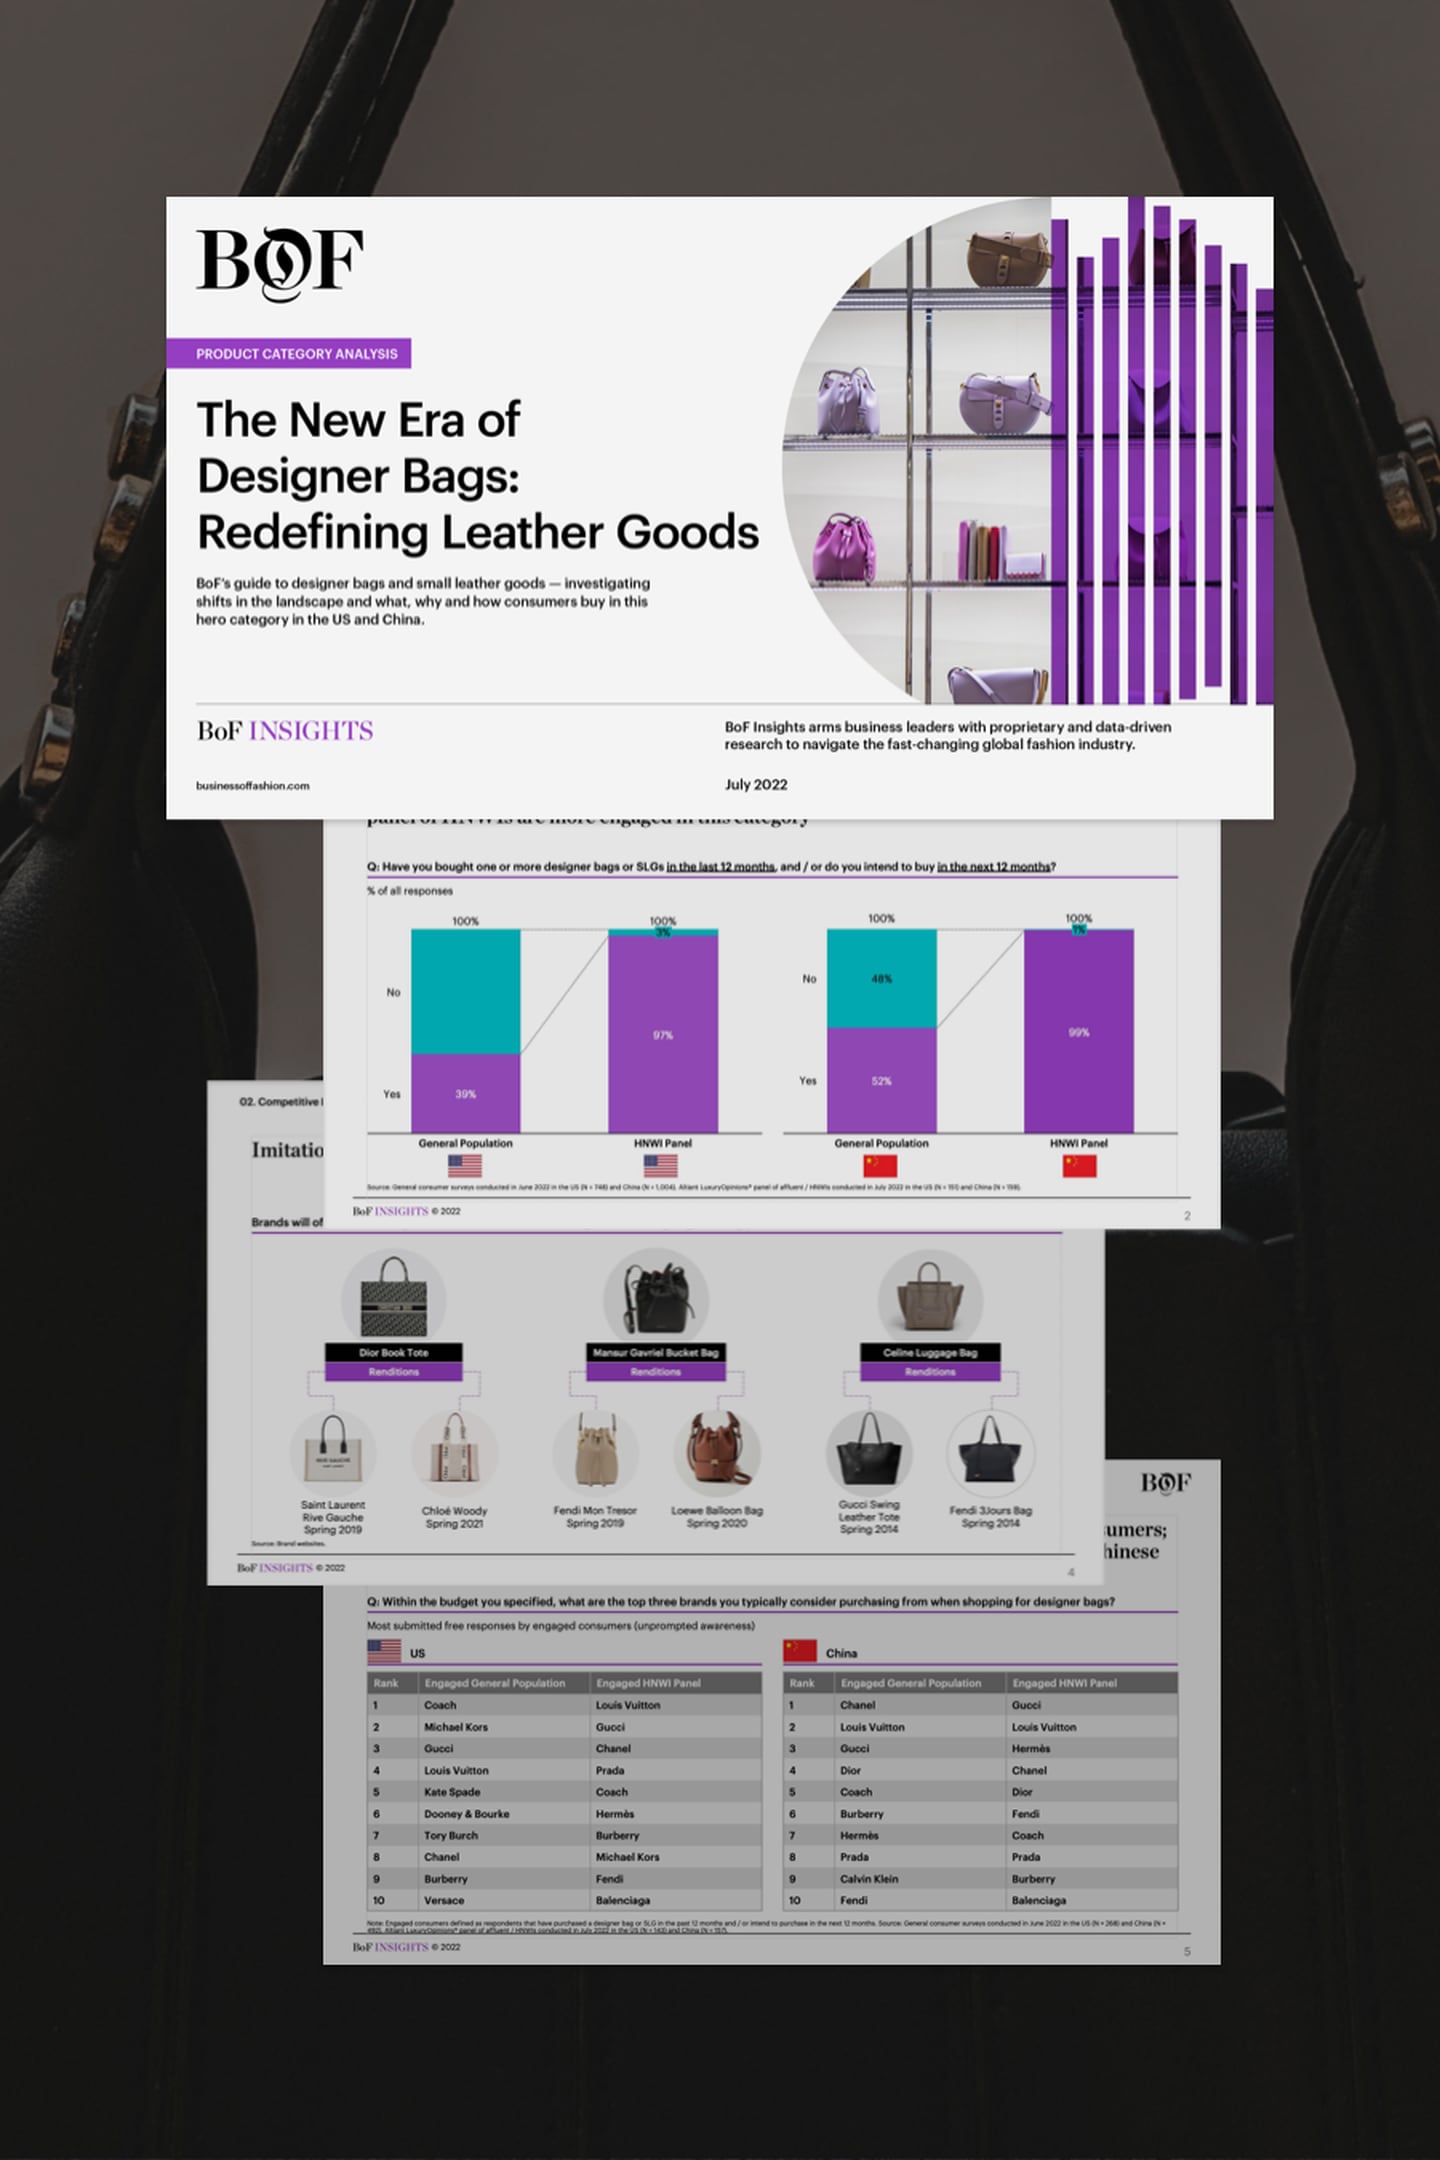 The New Era of Designer Bags: Redefining Leather Goods Report | BoF Insights